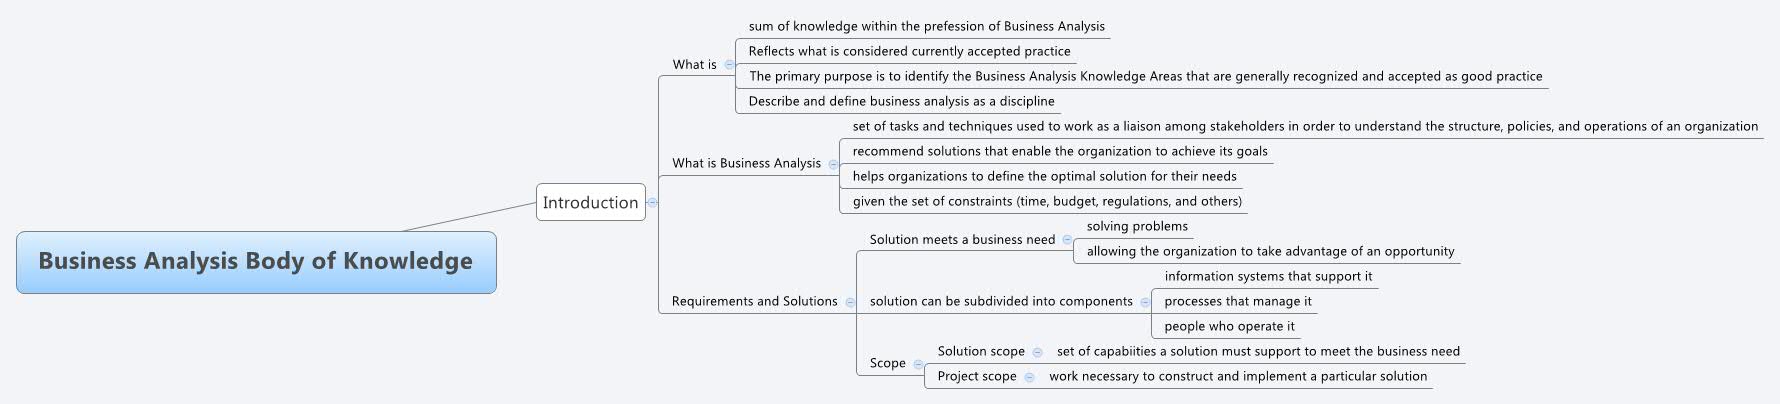 guide to the business analysis body of knowledge